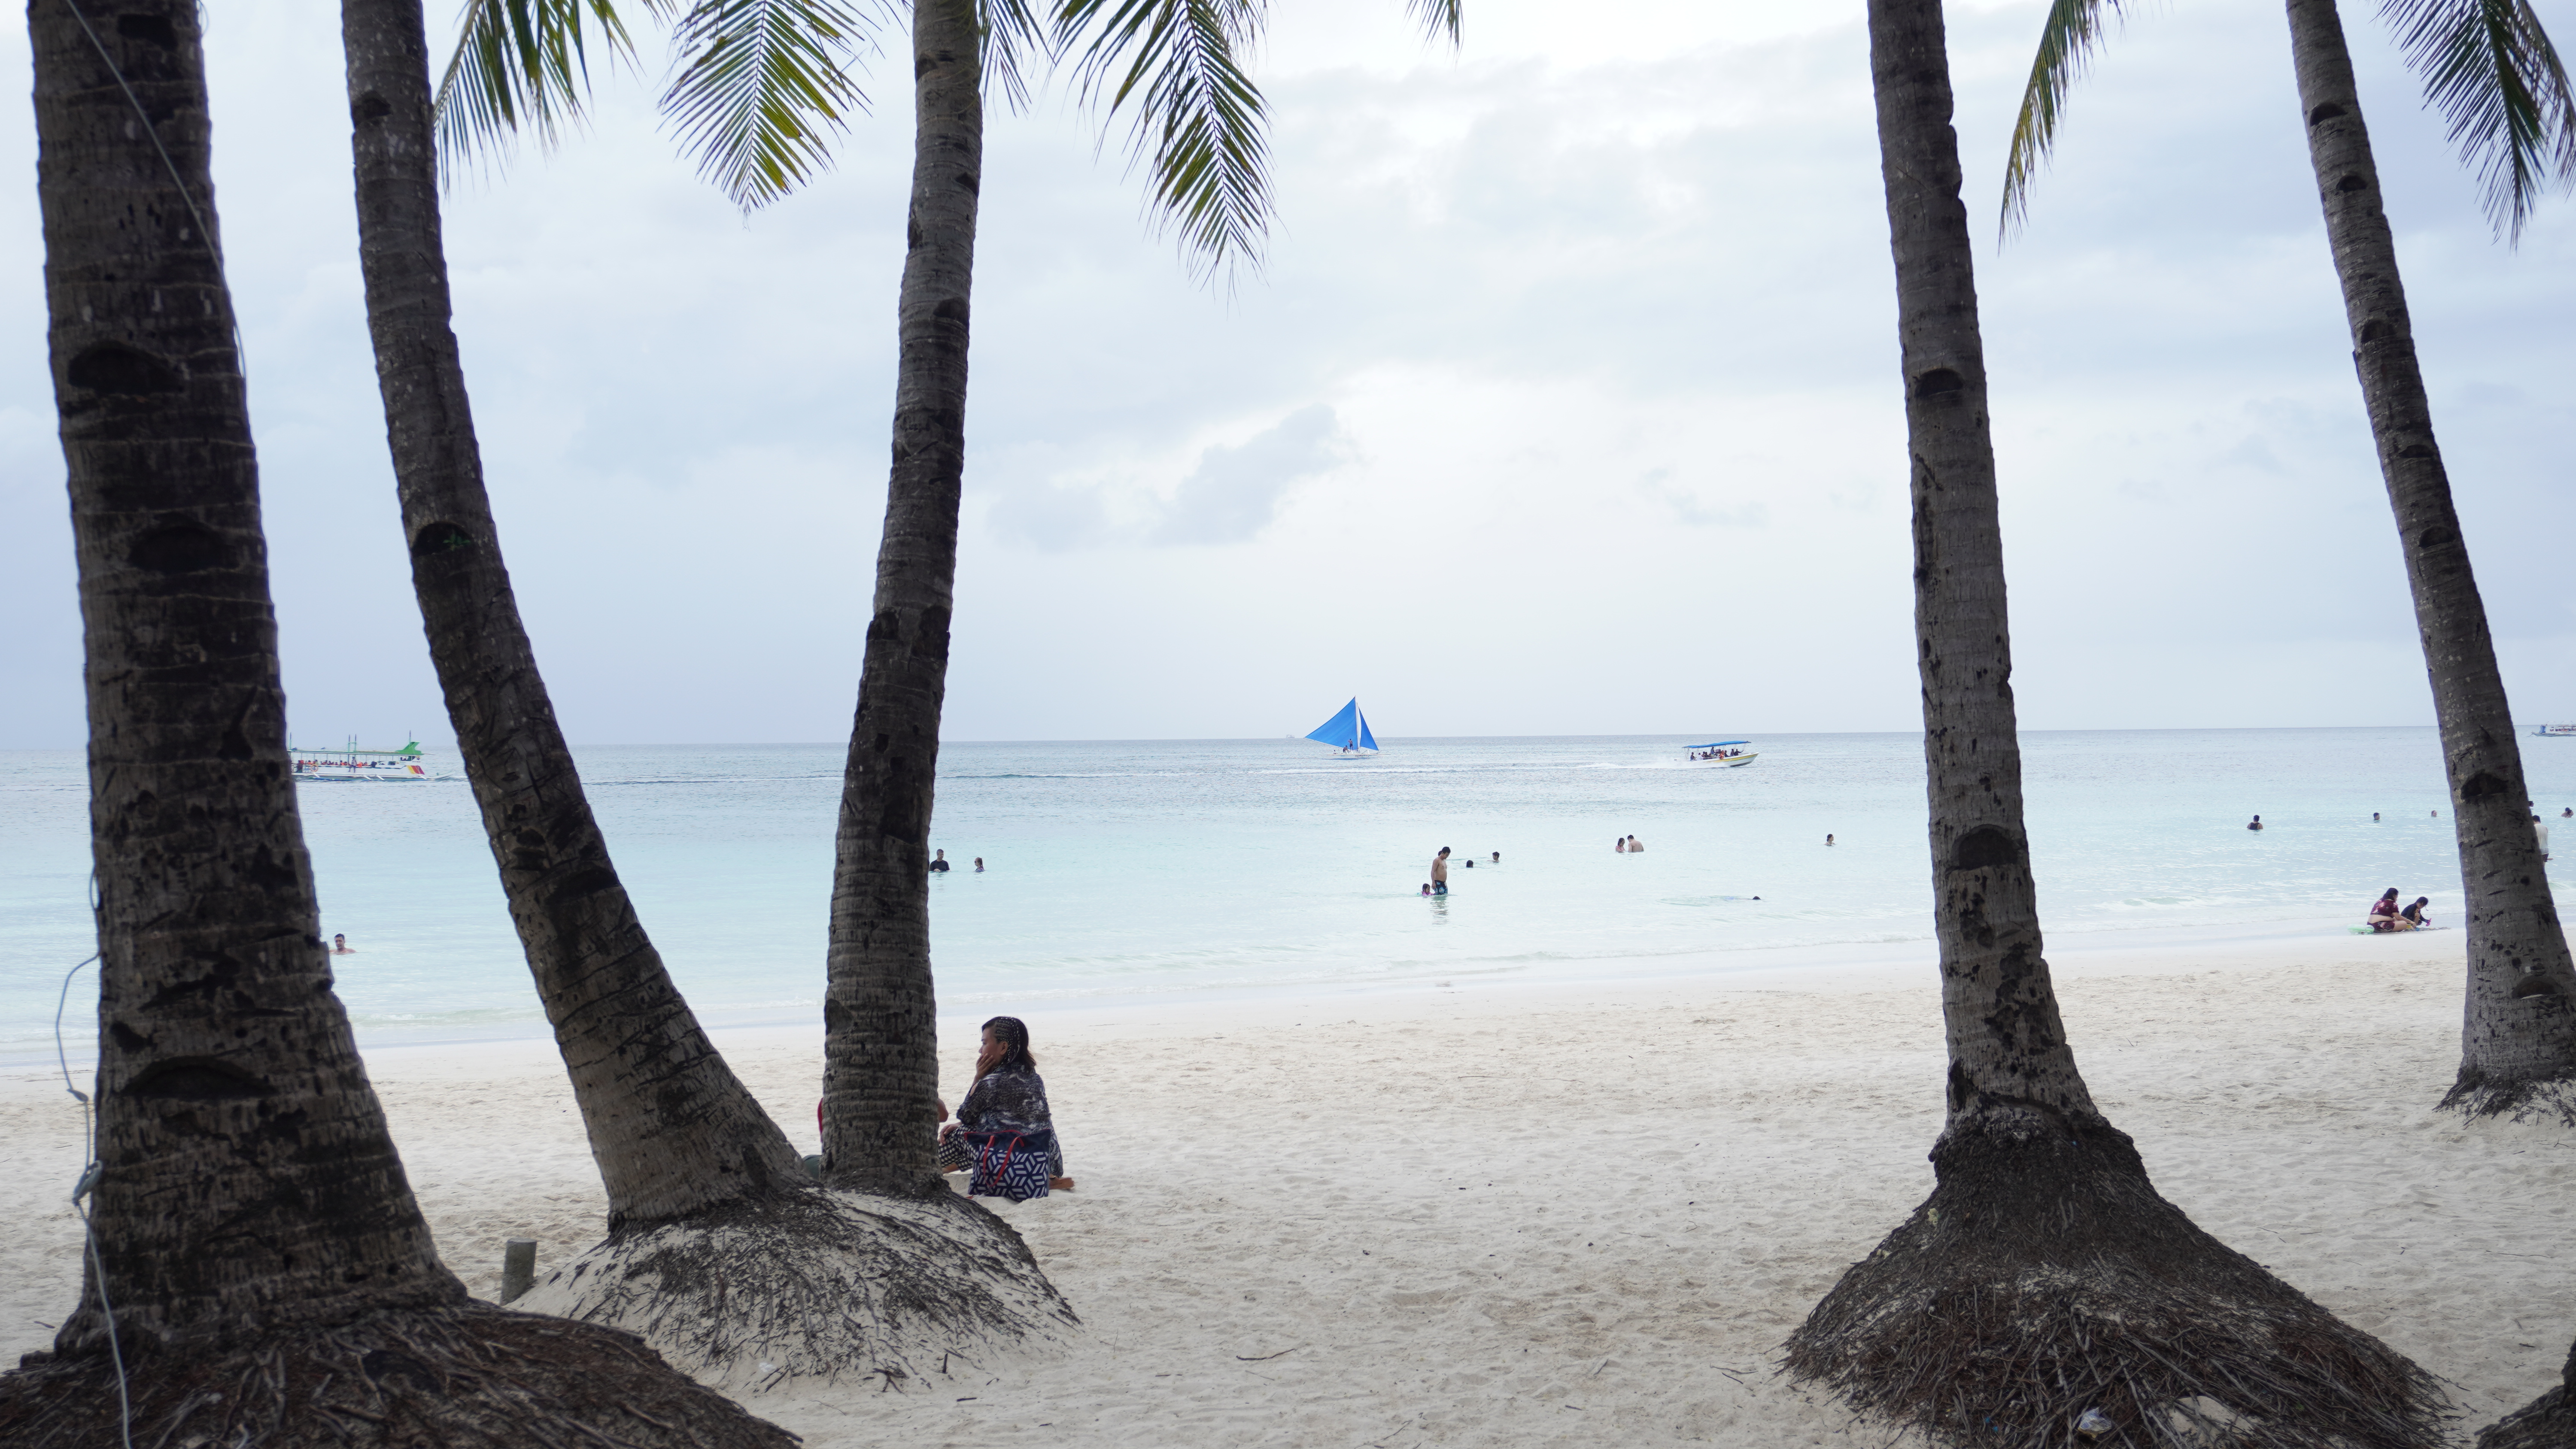 requirements for travel in boracay